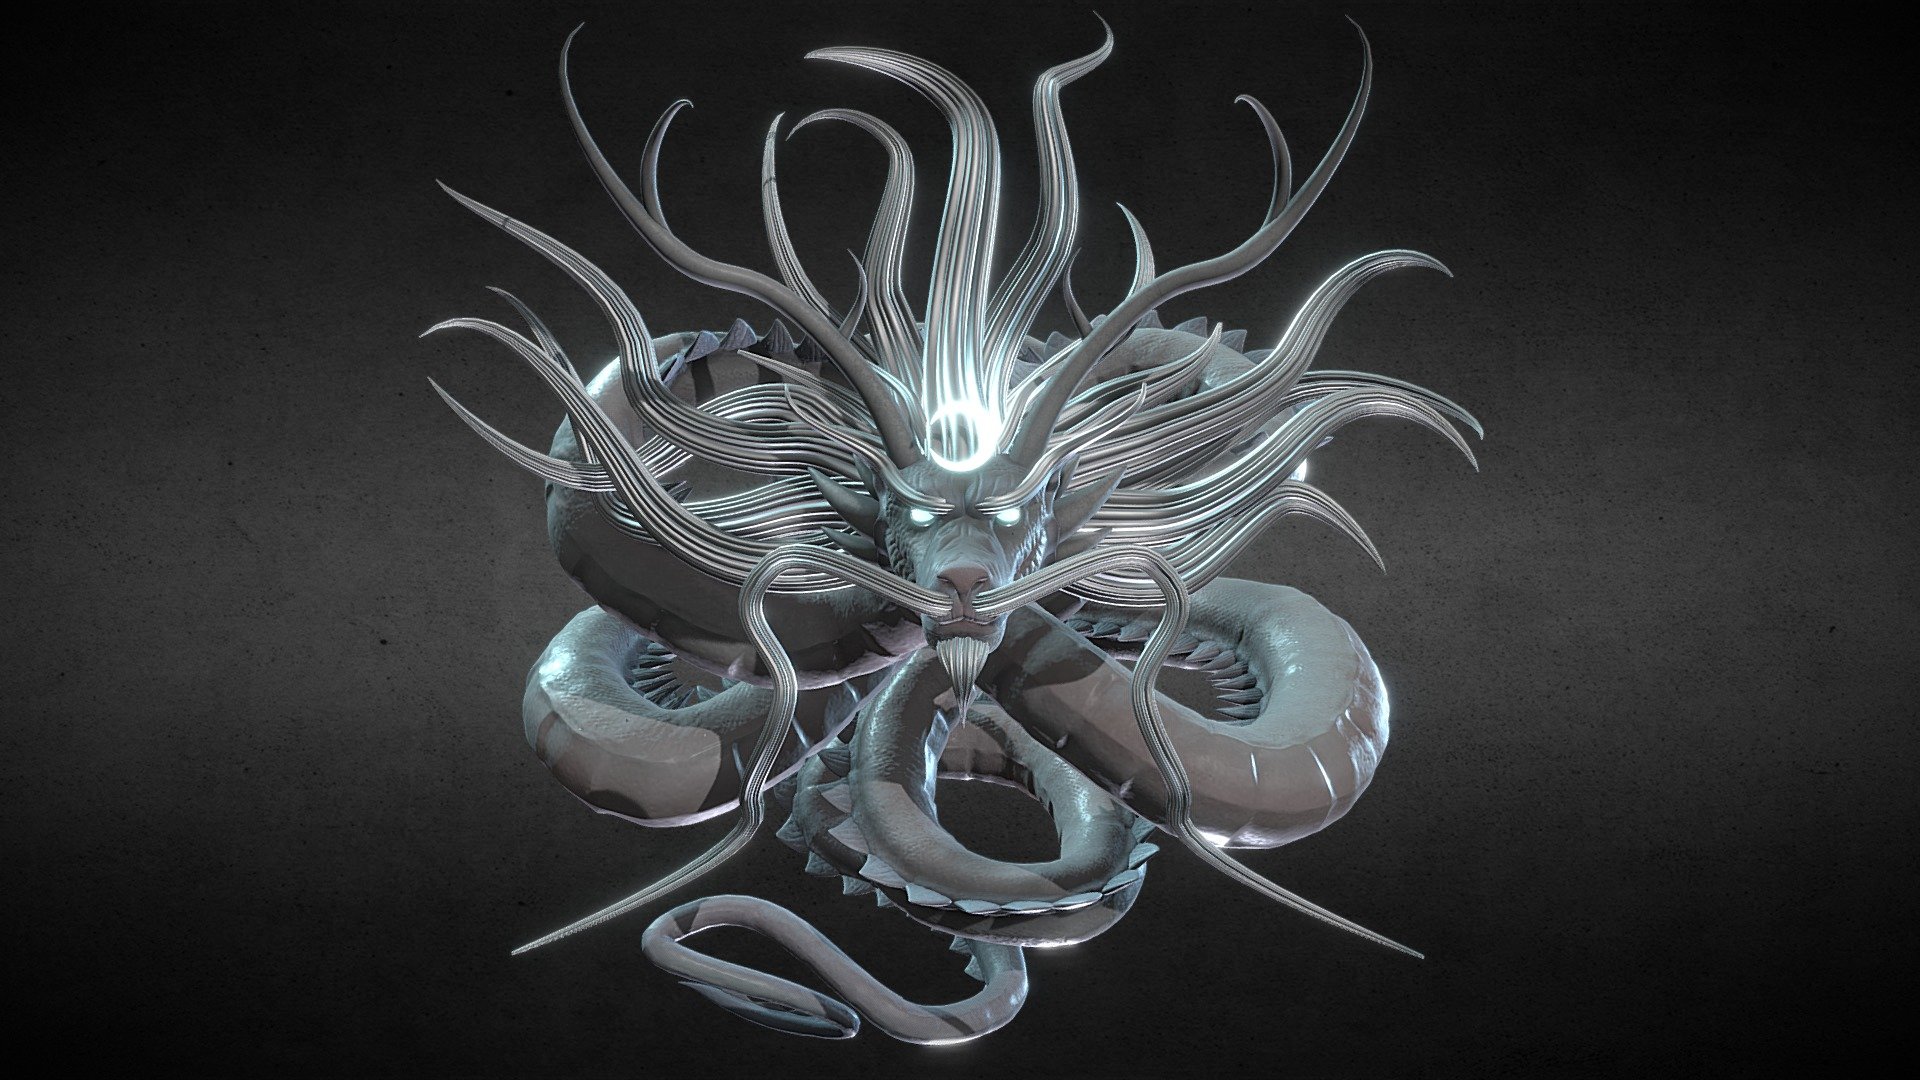 Day 2 - Lunar
Here is the protector of the night. The lunar Dragon. 😁
@sculptoberofficial - Shenron Luna - Buy Royalty Free 3D model by 3DGuimaraes 3d model